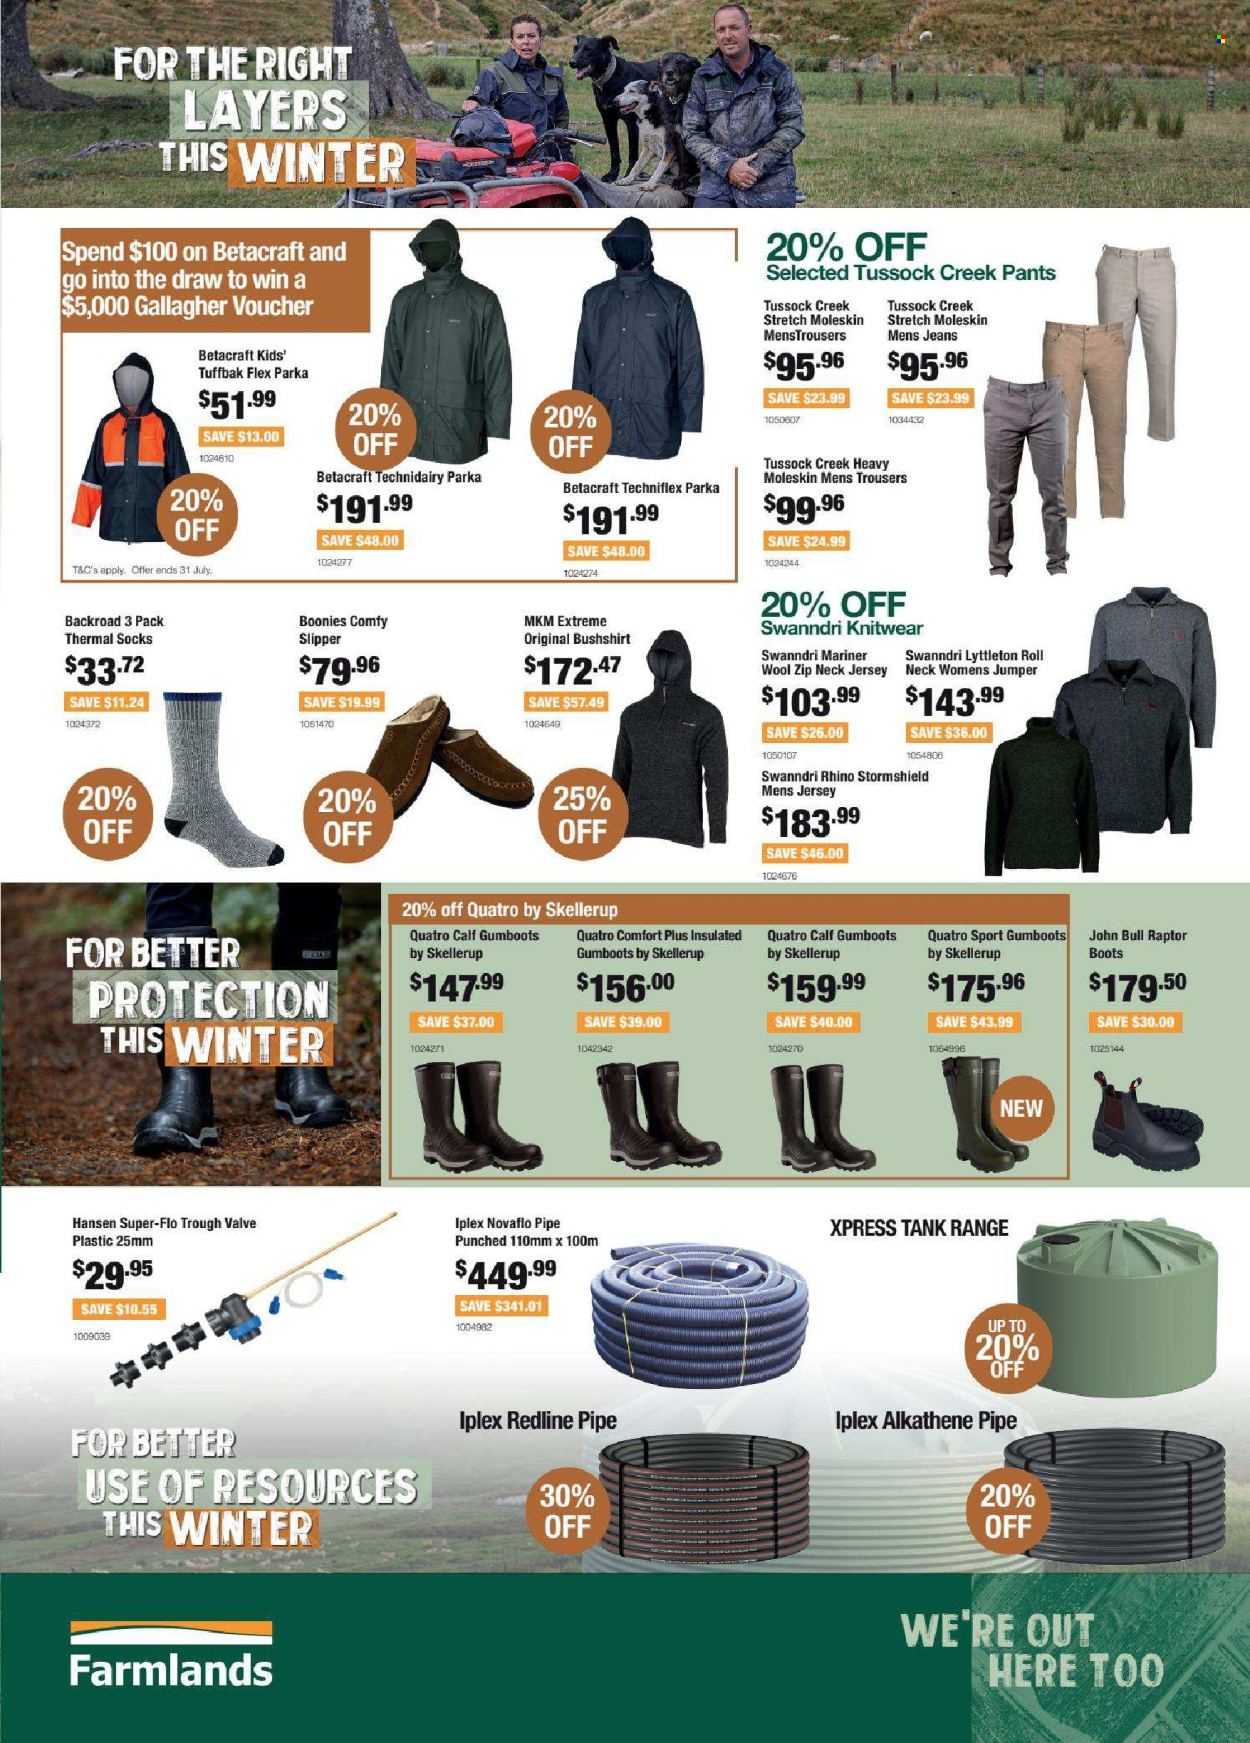 thumbnail - Farmlands mailer - Sales products - boots, slippers, tank, parka, trousers, jeans, pants, sweater, jersey, knitwear, socks, thermal socks, pipe. Page 3.